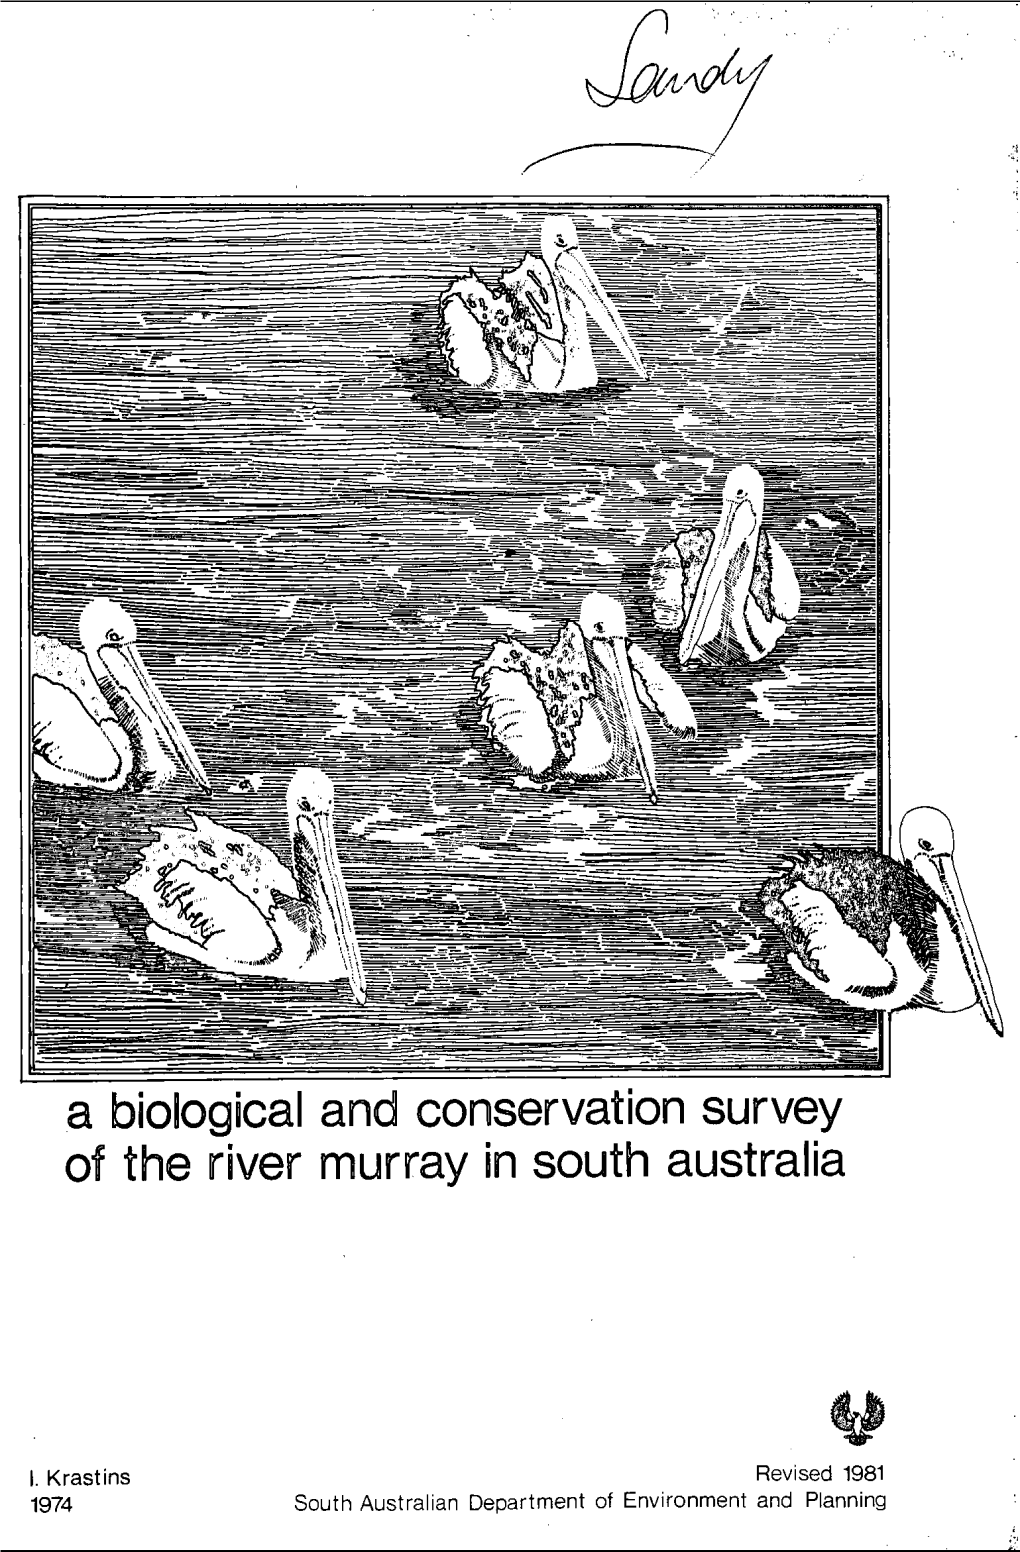 A Biological and Conservation Survey of the River Murray in South Australia"